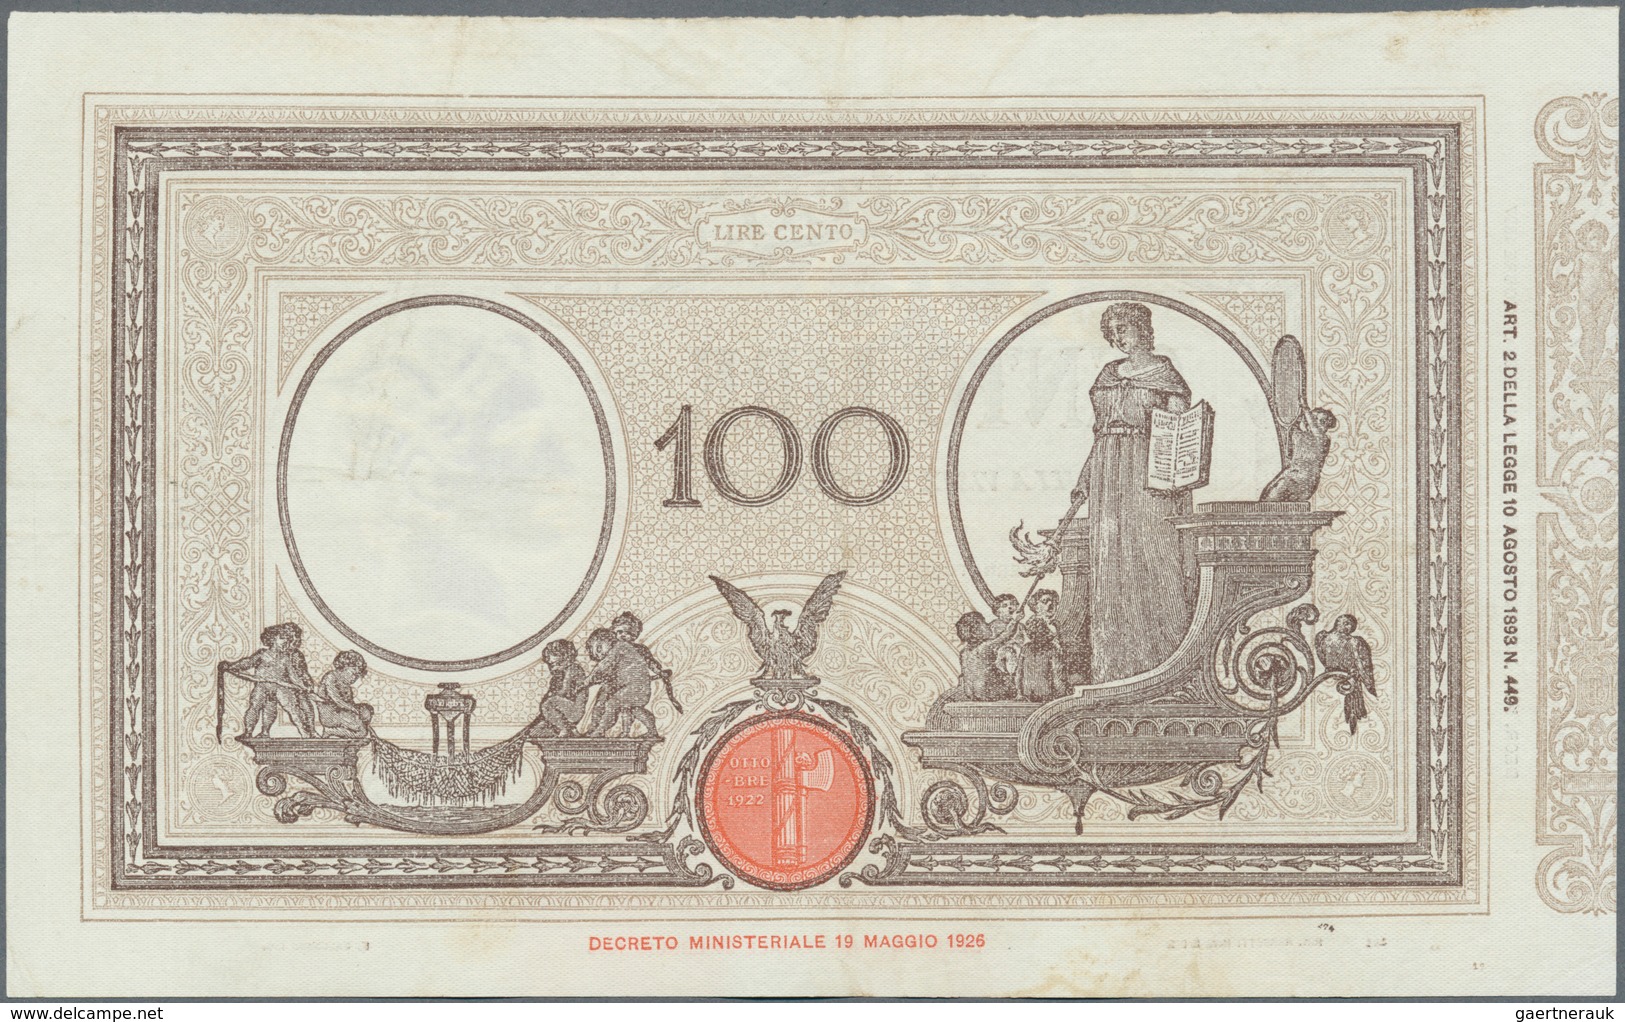 Italy / Italien: set of 5 notes containing 100 Lire 1927/29/30 P. 48, all used with light folds, pre